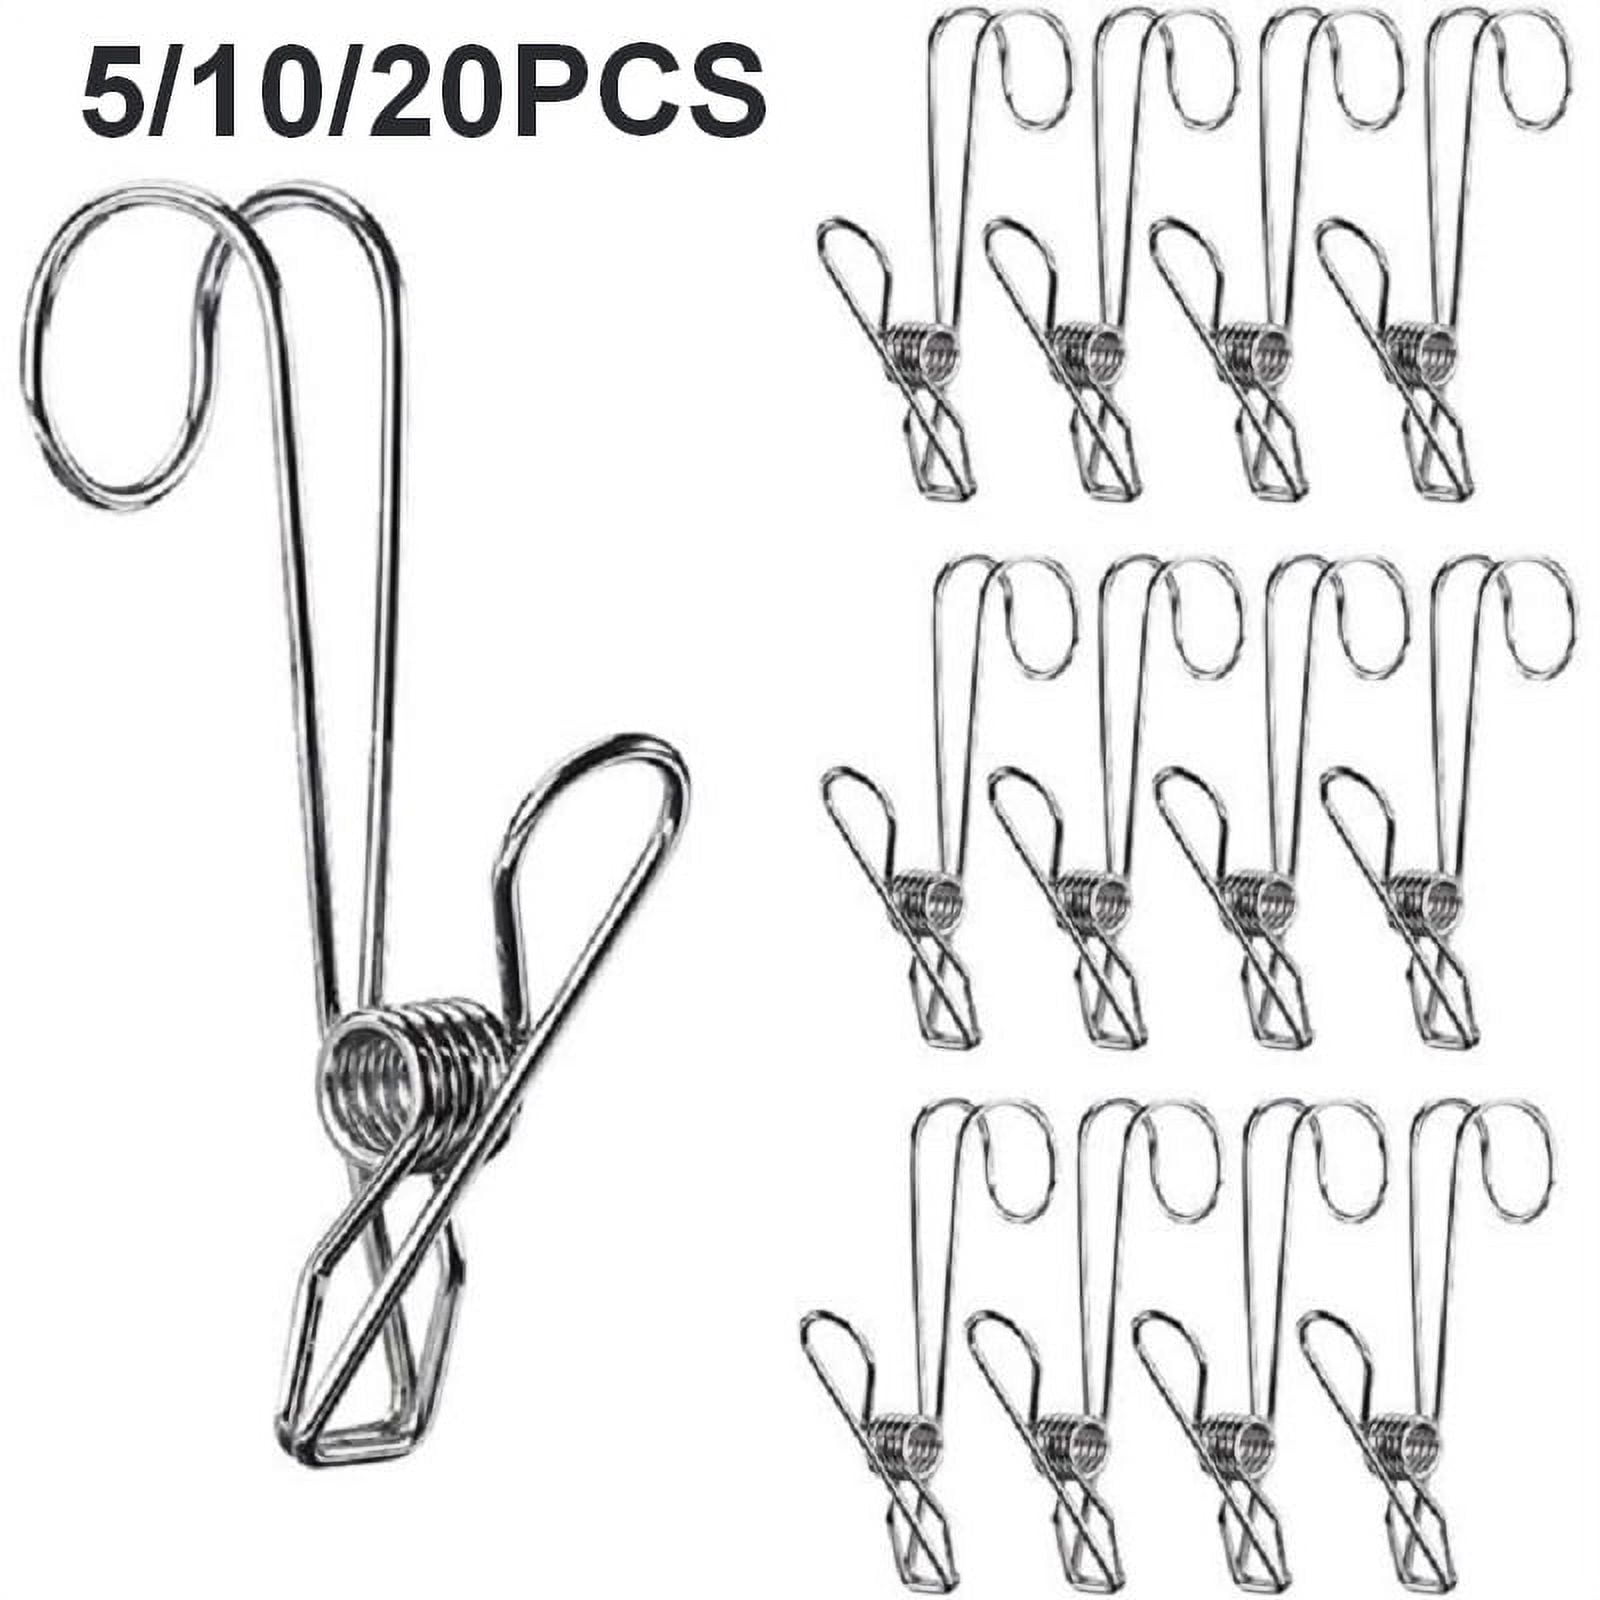 8Pcs Black Clothes Pins with Springs Sock Clip Strong Laundry Hook